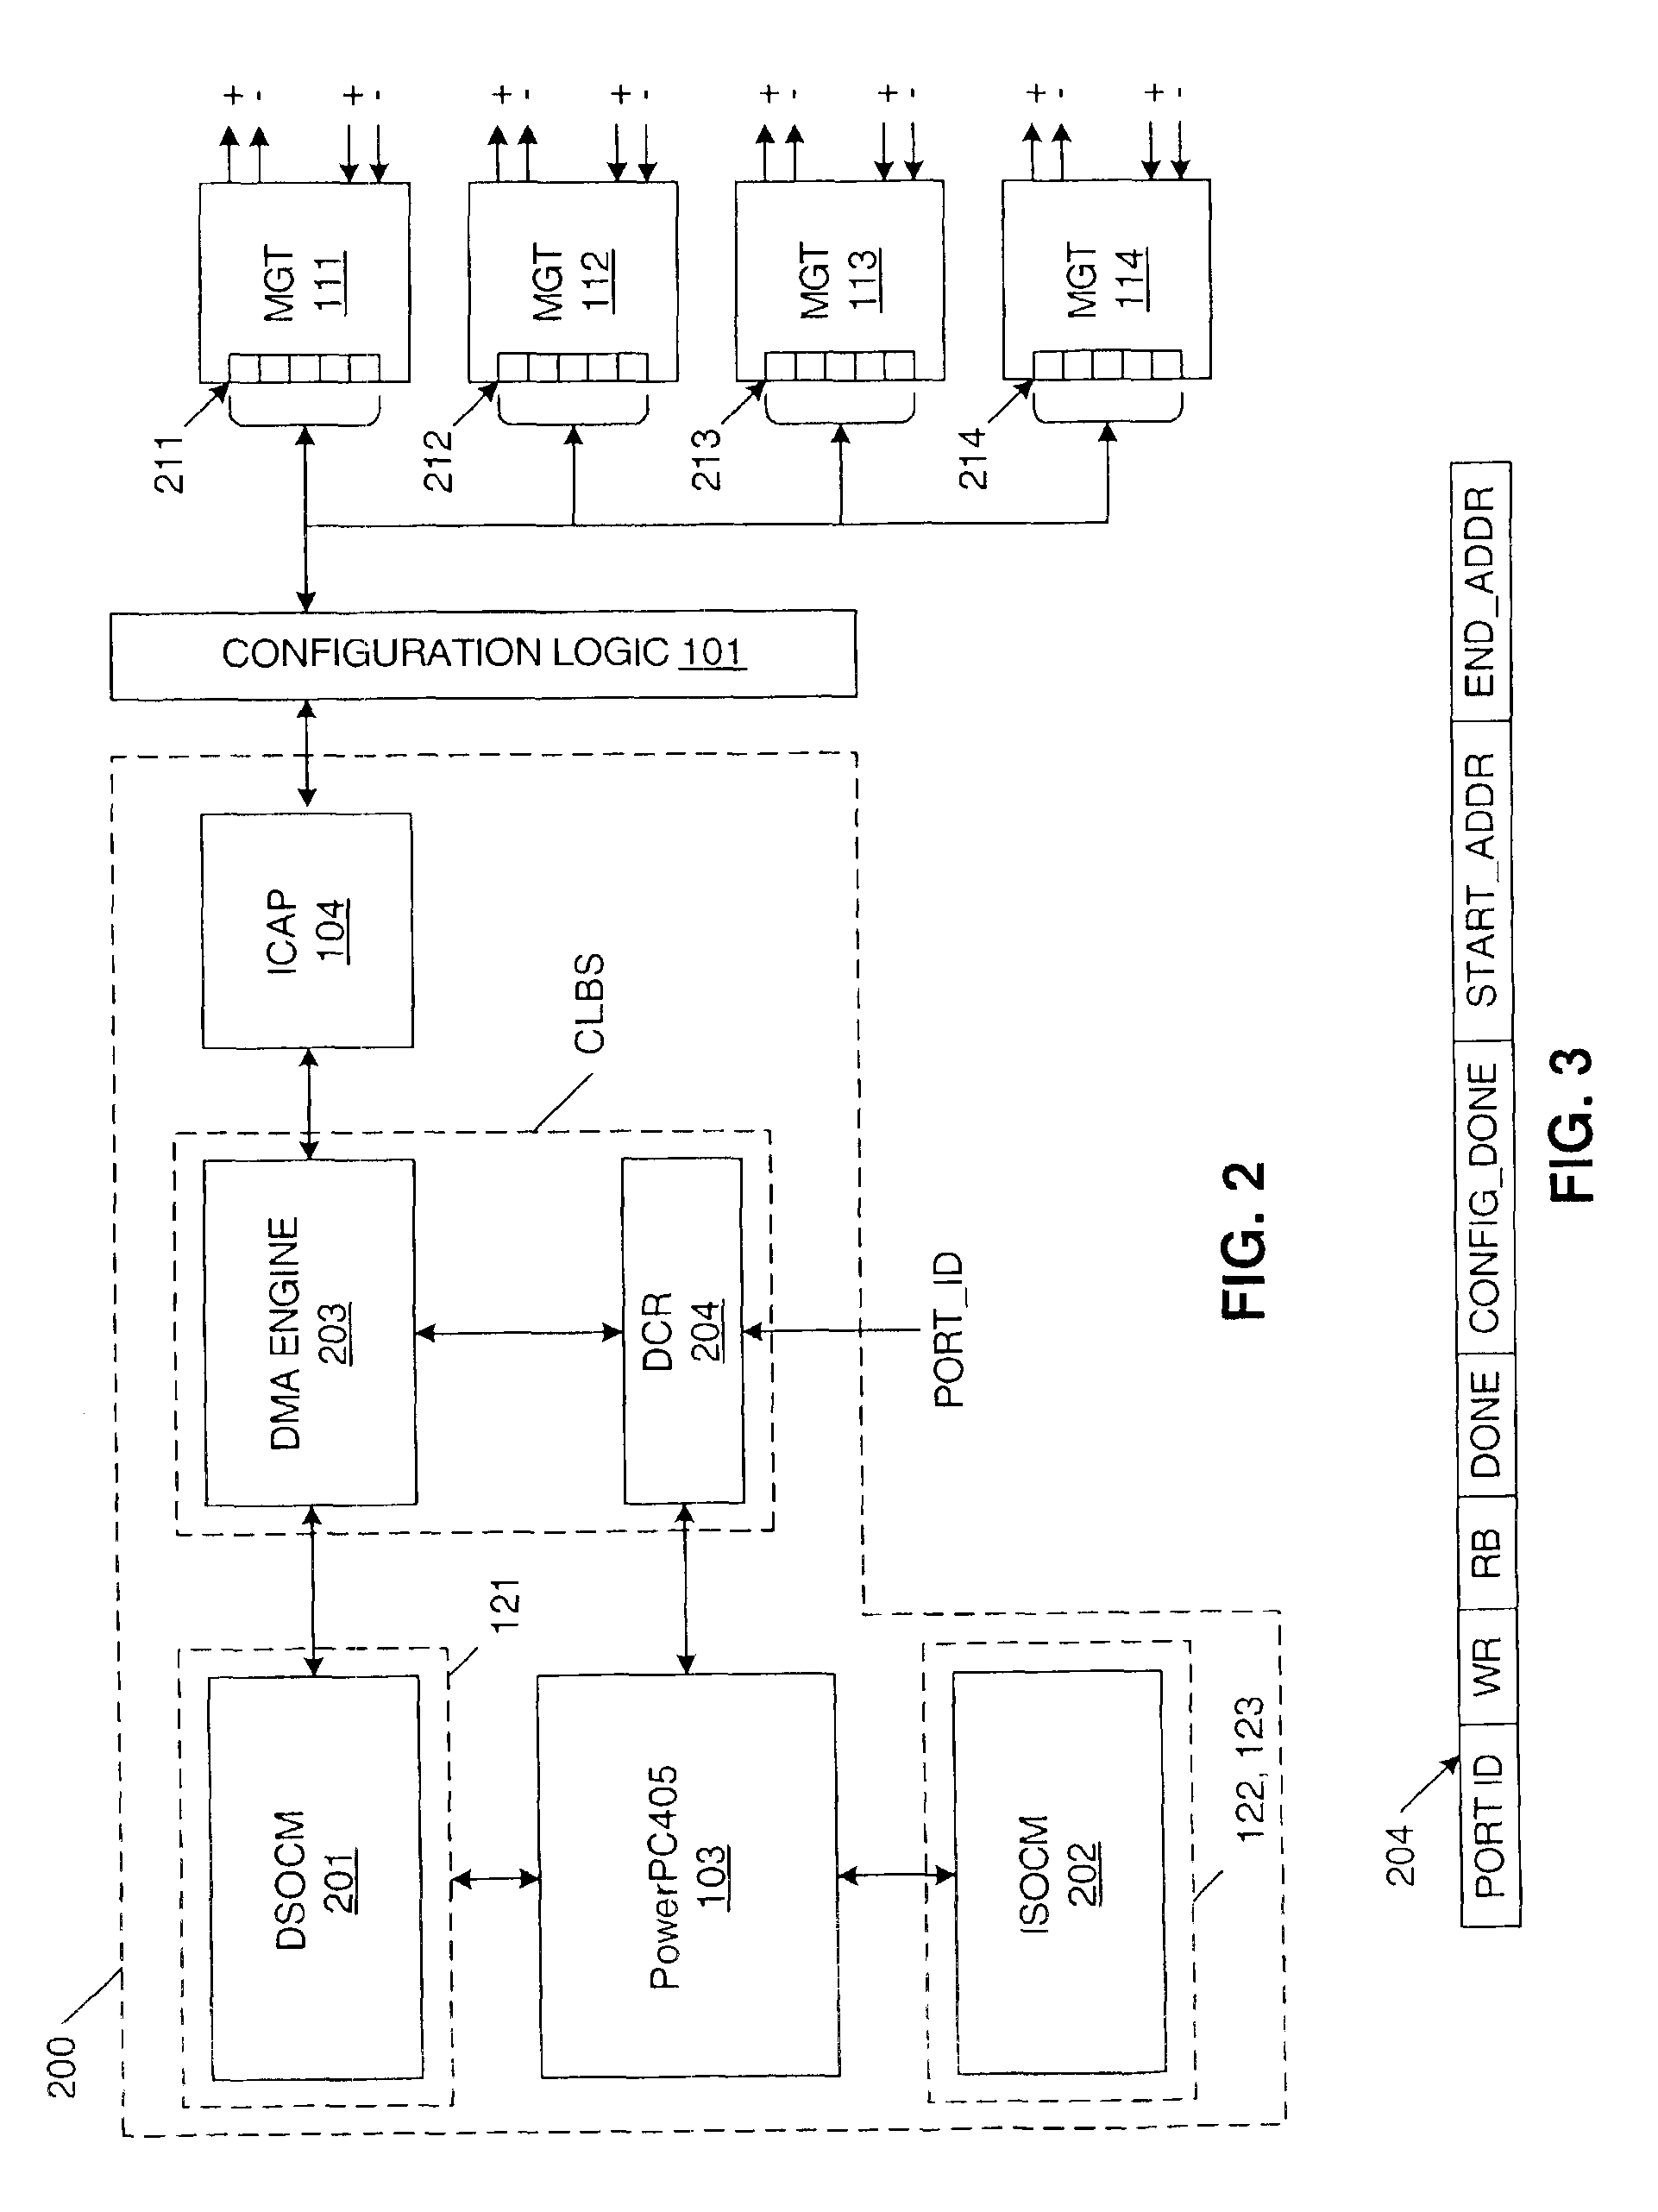 Partial reconfiguration of a programmable logic device using an on-chip processor